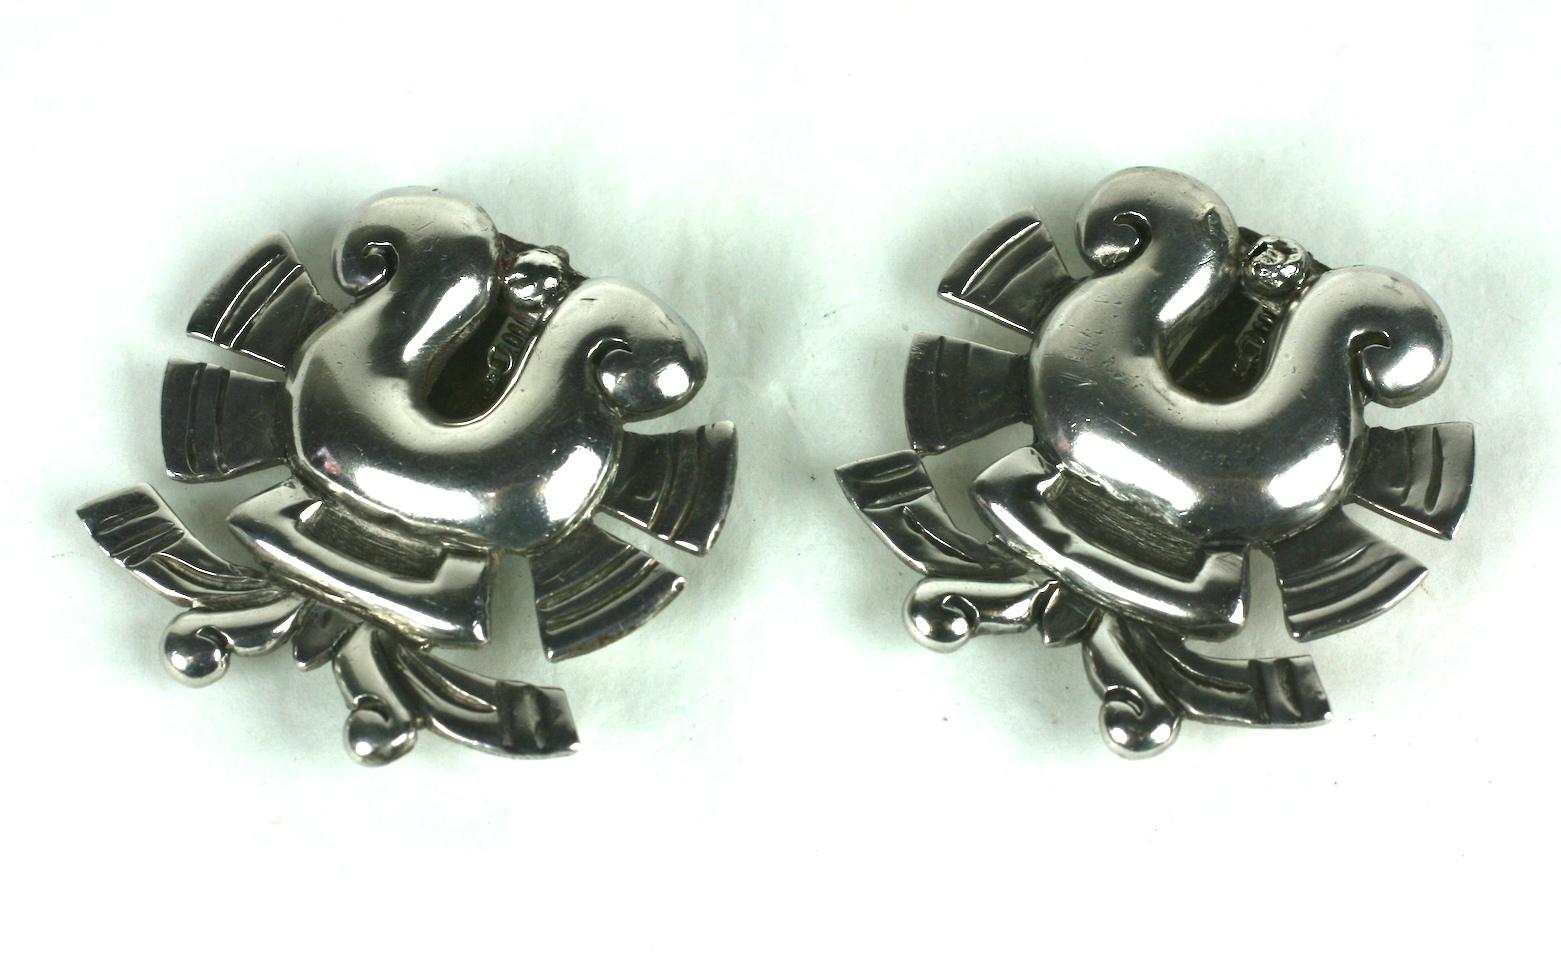 William Spratling Sterling Dress Clips from the Art Deco period. Traditional Mexican motifs used for these elegant hand raised designs. Can be worn on lapel, neckline, scarf or pocket edge.
Early 